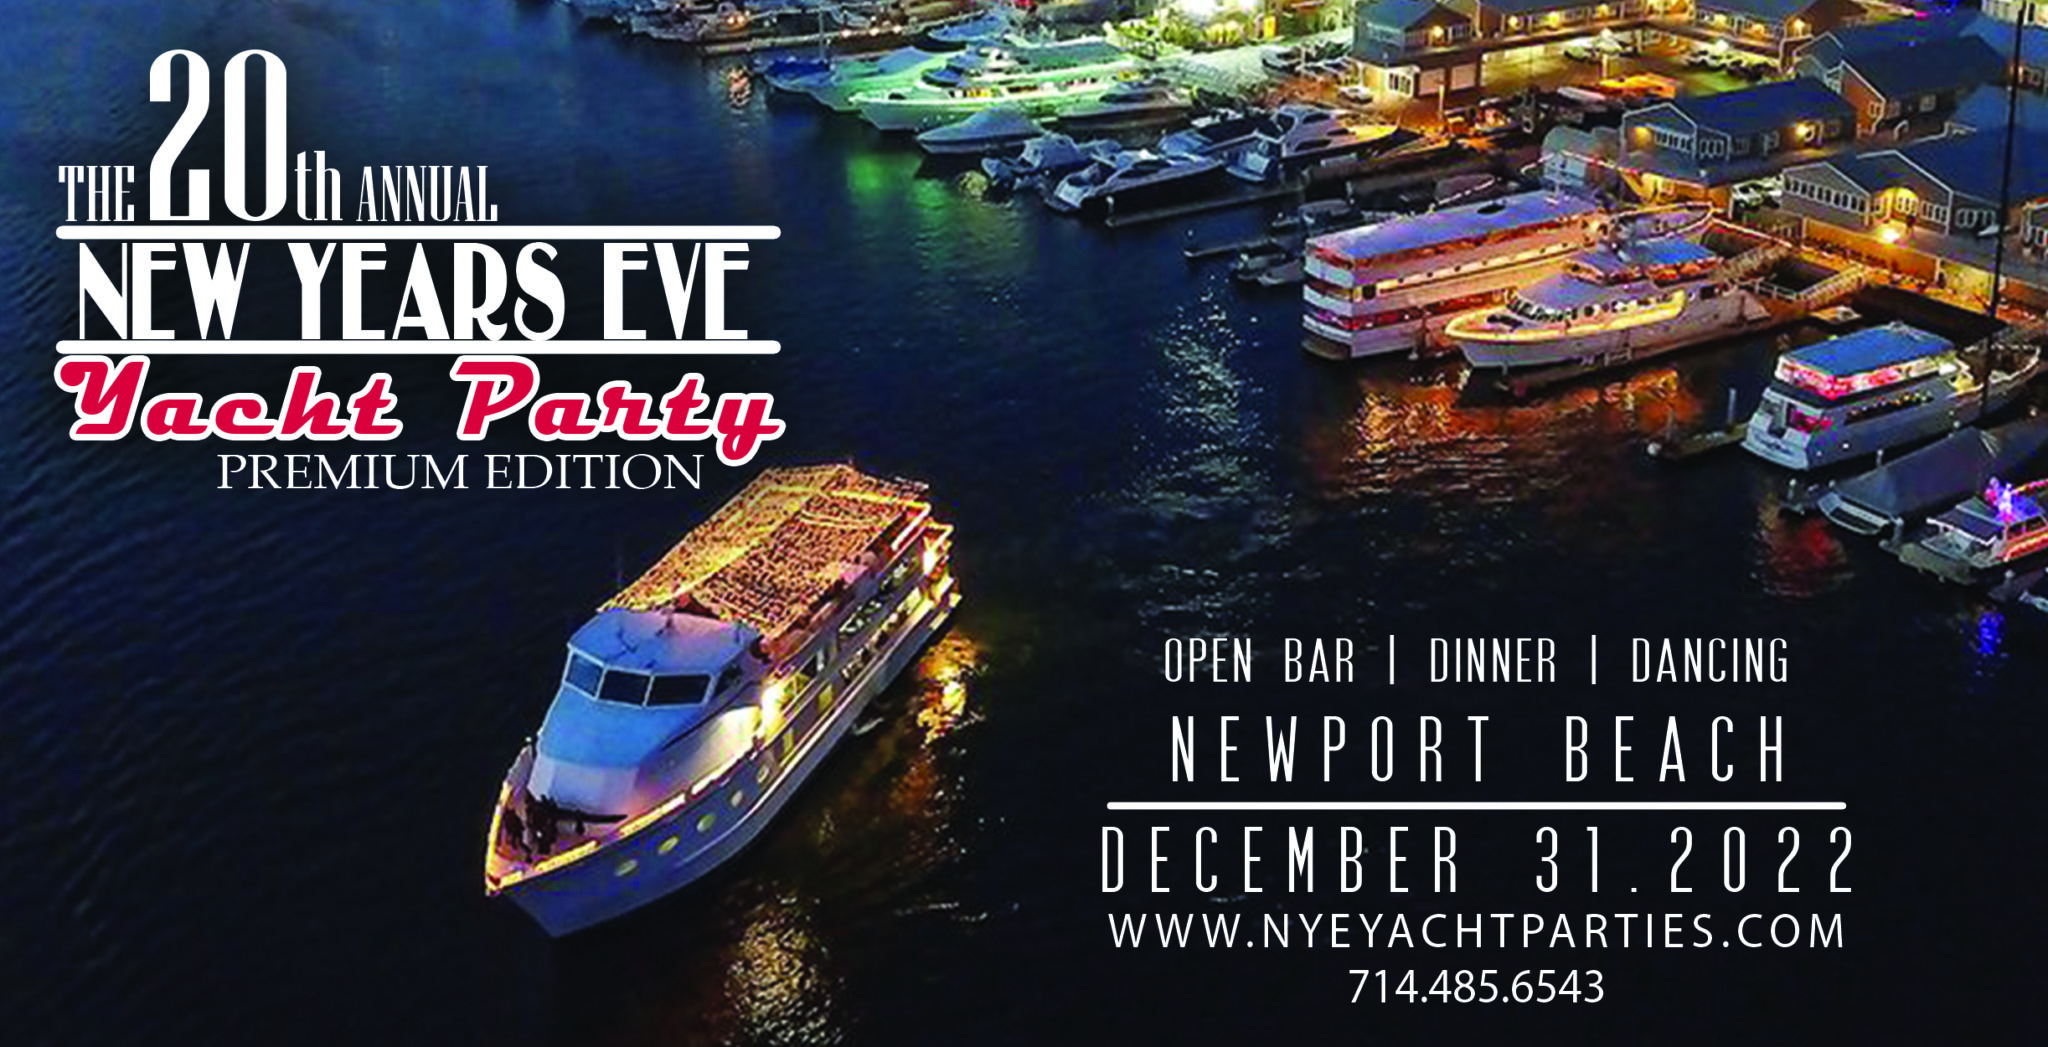 New Year’s Eve Yacht Parties Annual Yacht Parties